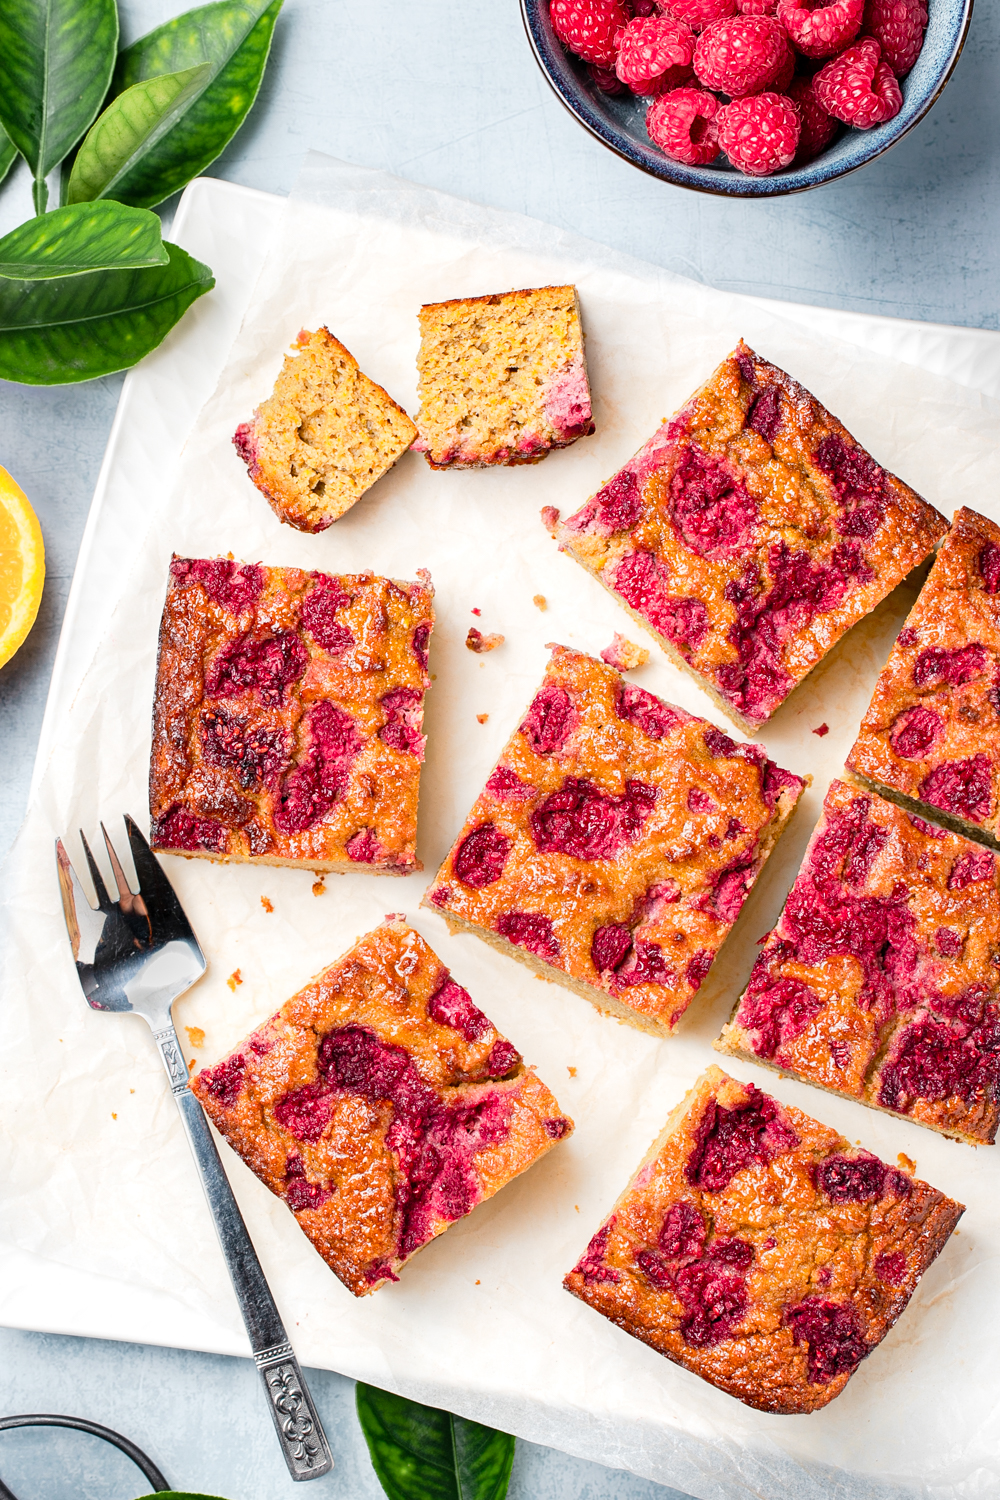 Square slices of orange almond and raspberry healthy cake against a blue background with fresh raspberries